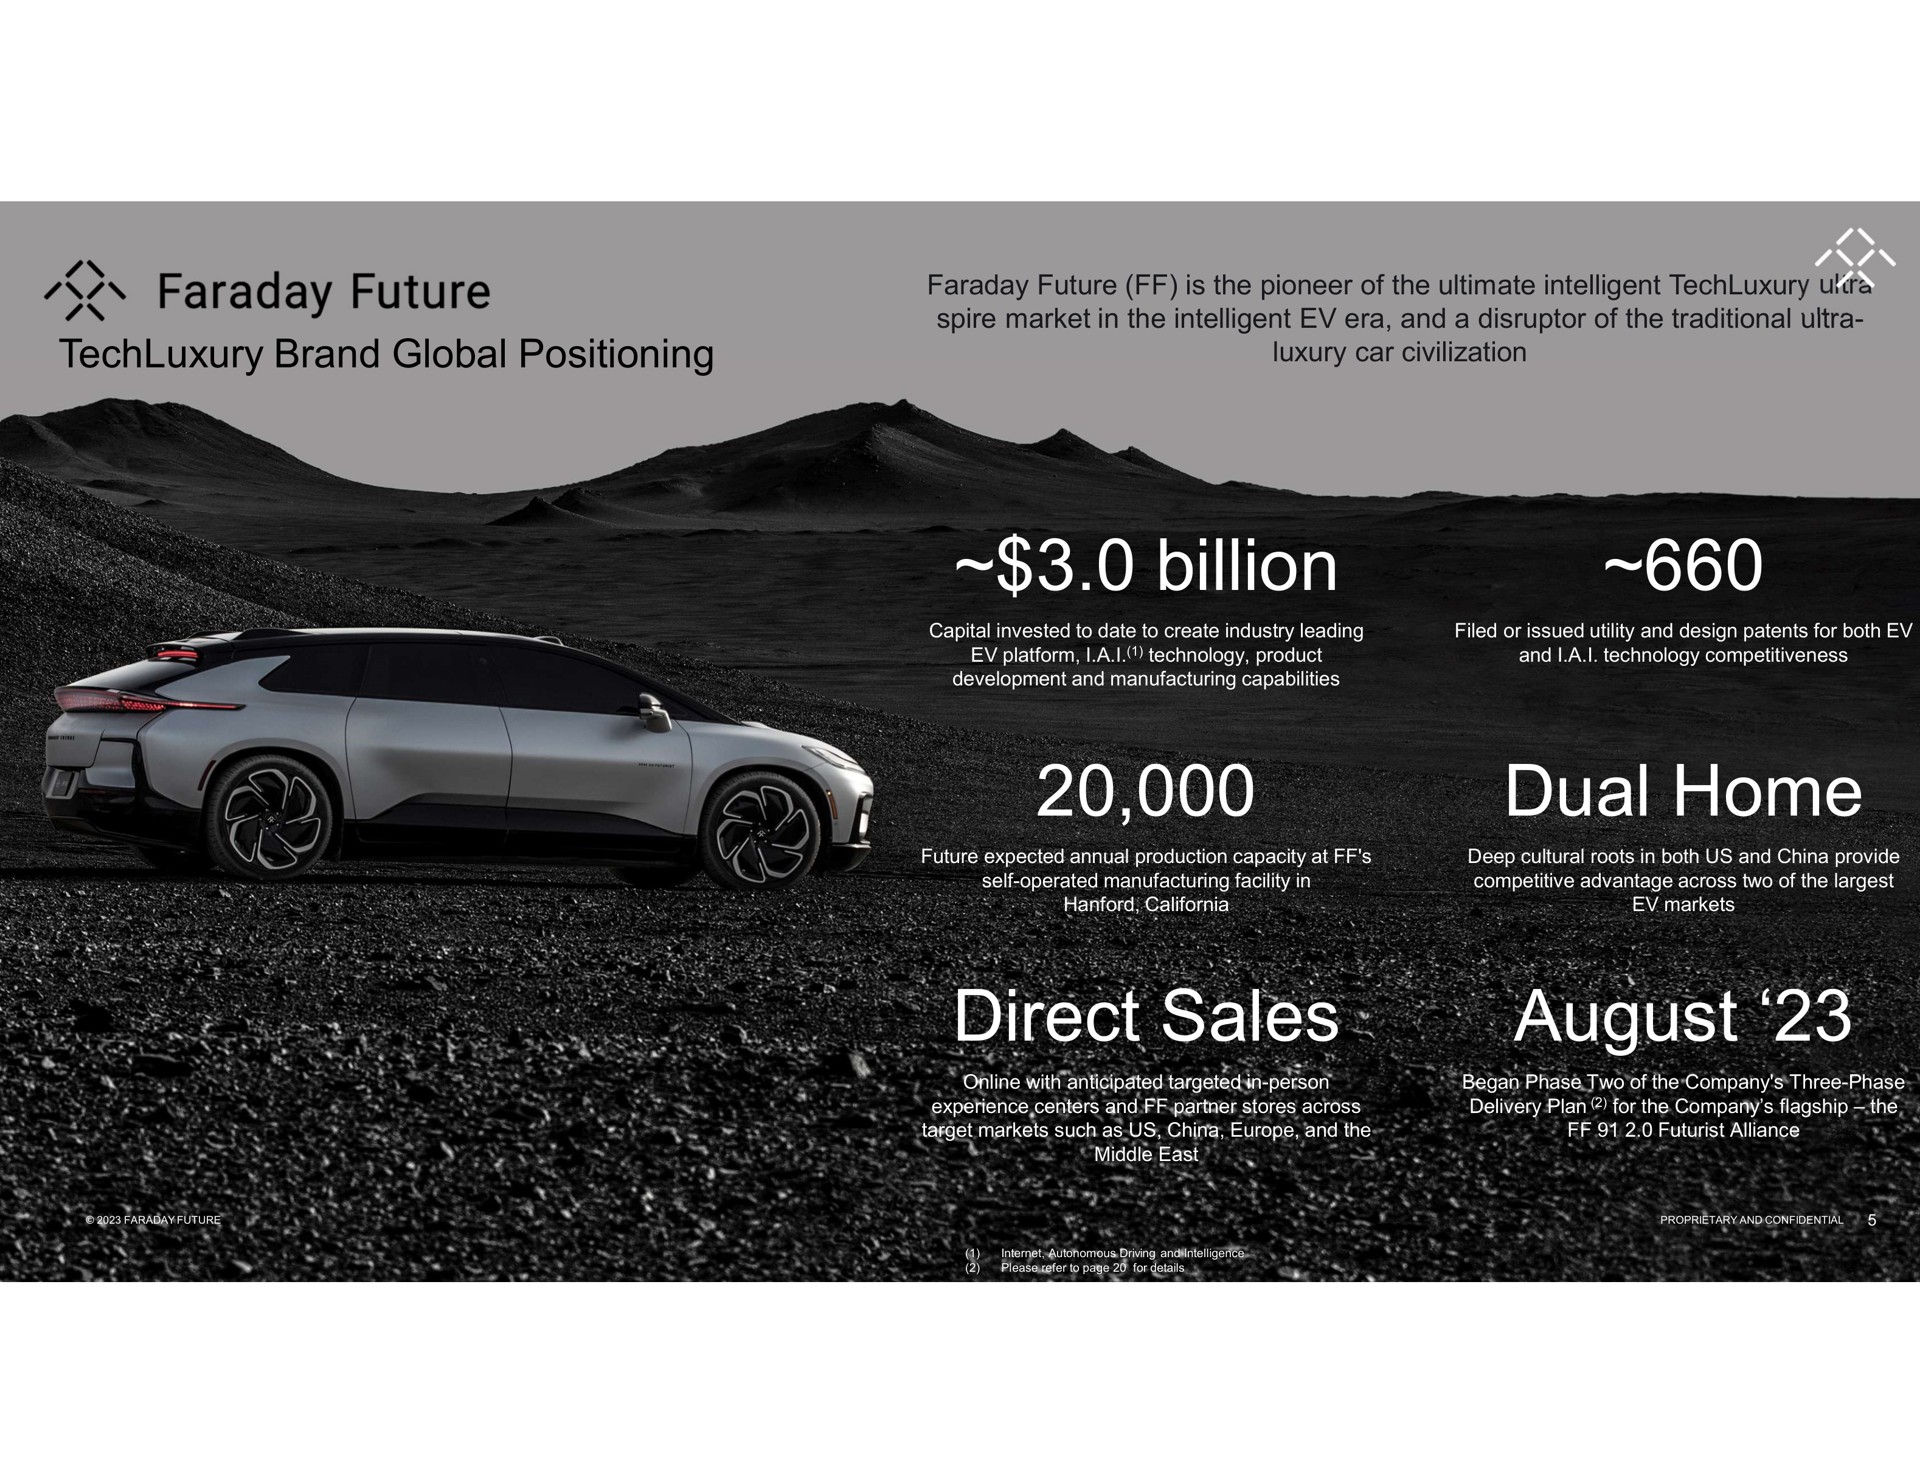 brand global positioning faraday future is the pioneer of the ultimate intelligent ultra spire market in the intelligent era and a disruptor of the traditional ultra luxury car civilization billion dual home direct sales august roe sos middle | Faraday Future